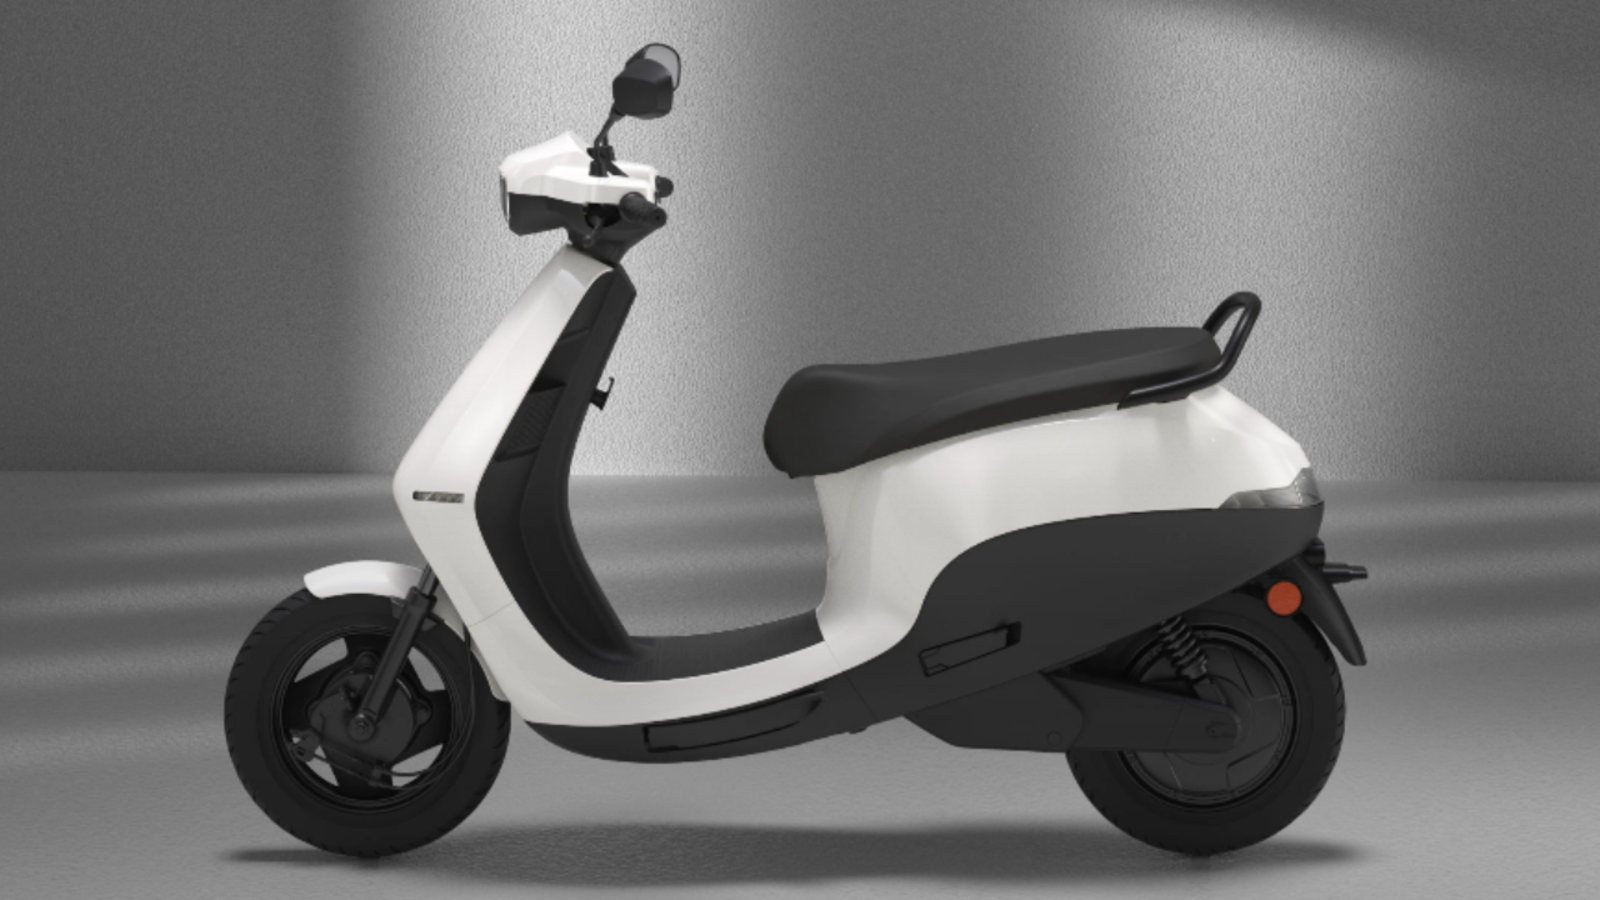 ola s1 air: Ola Electric unveils cheaper version of S1 electric scooter at  Rs 79,999 - The Economic Times